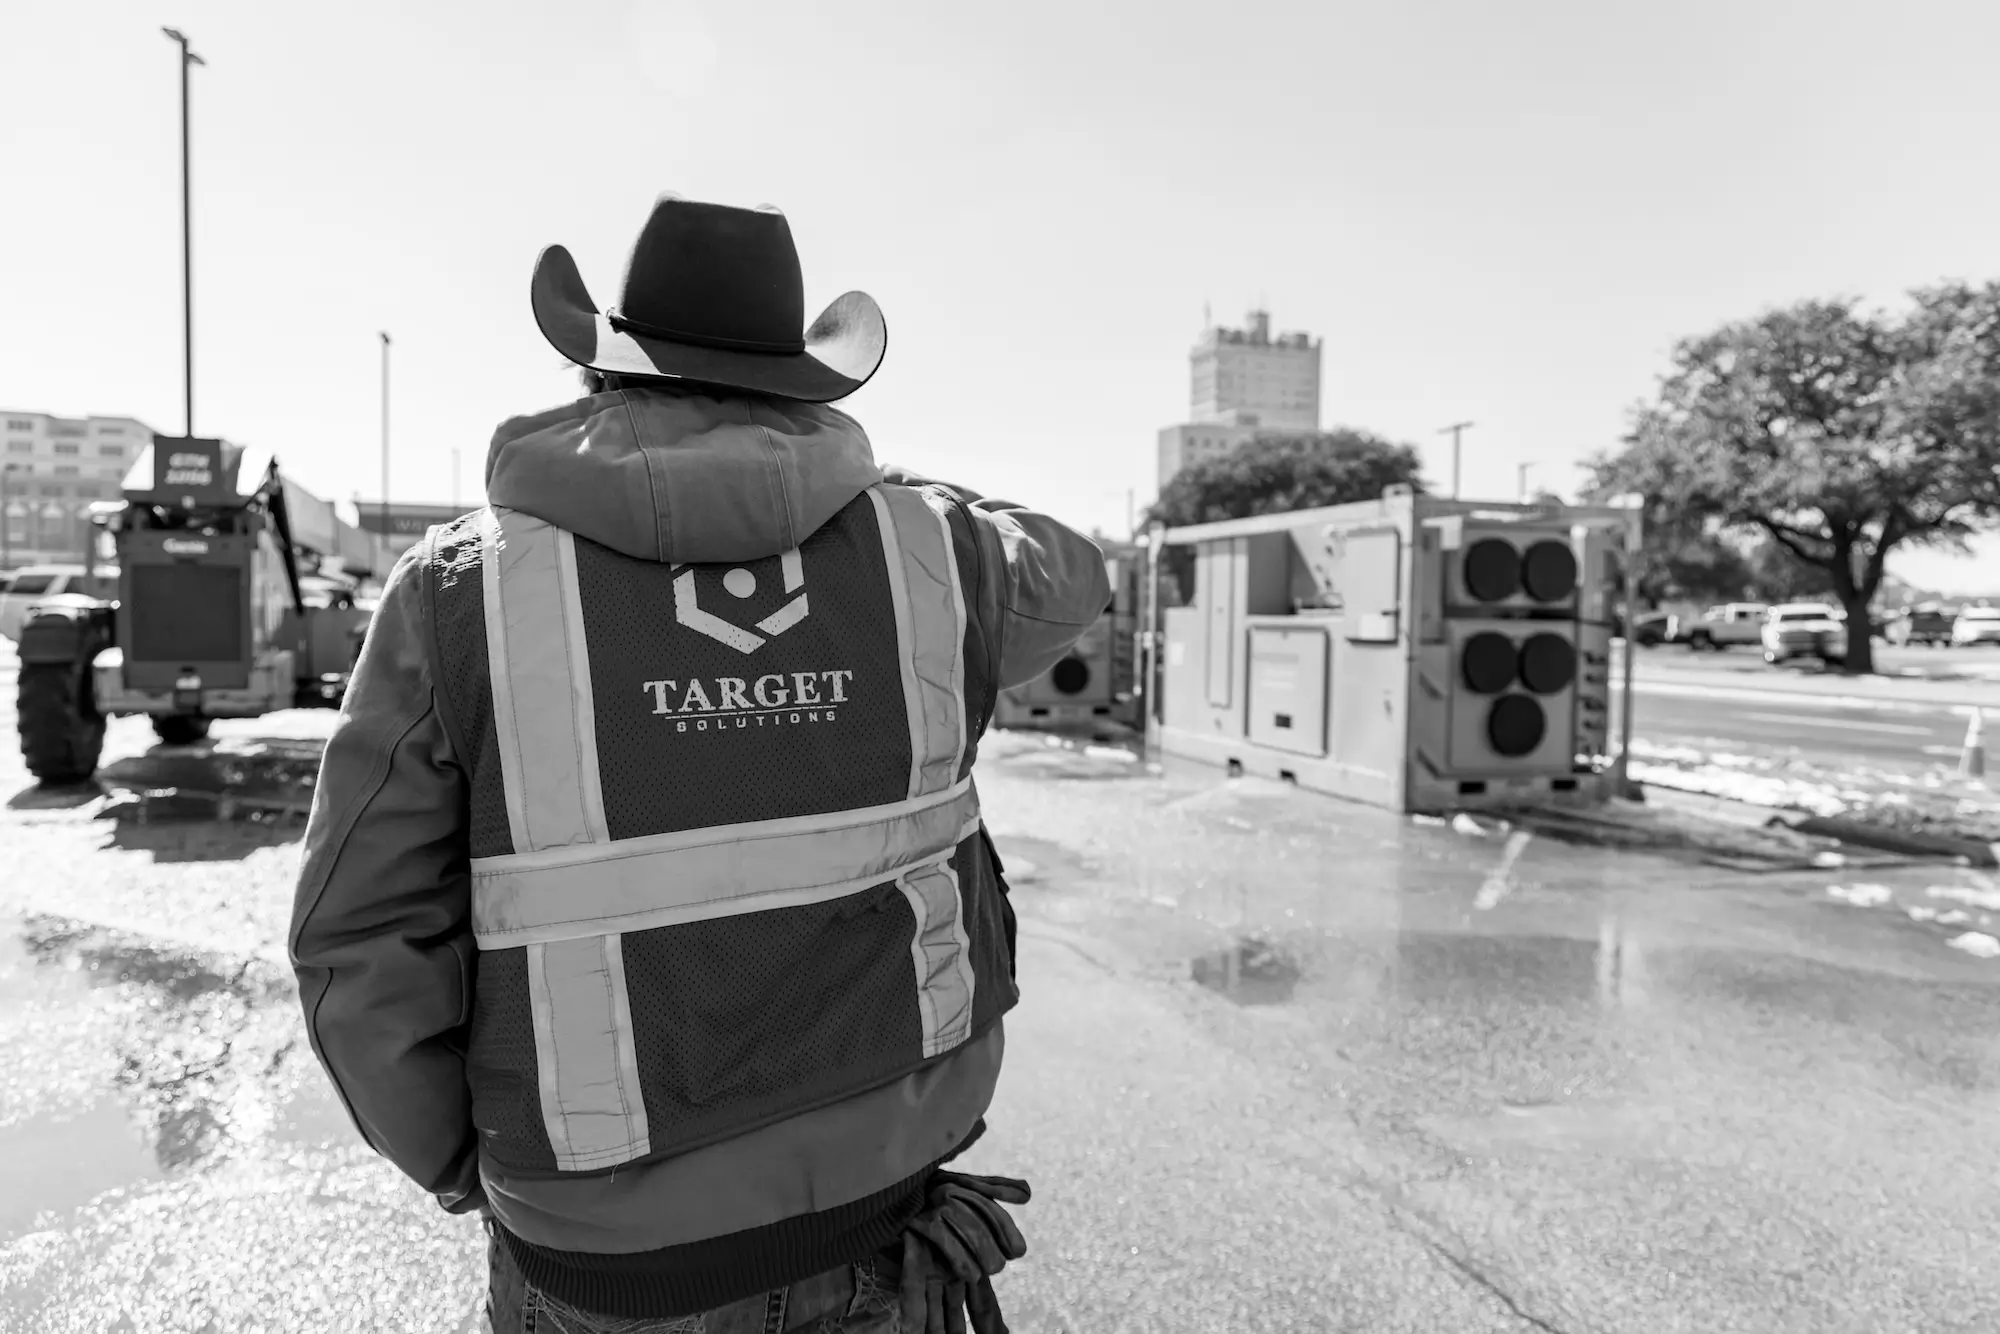 Target professional wearing a cowboy hat looking over a job site